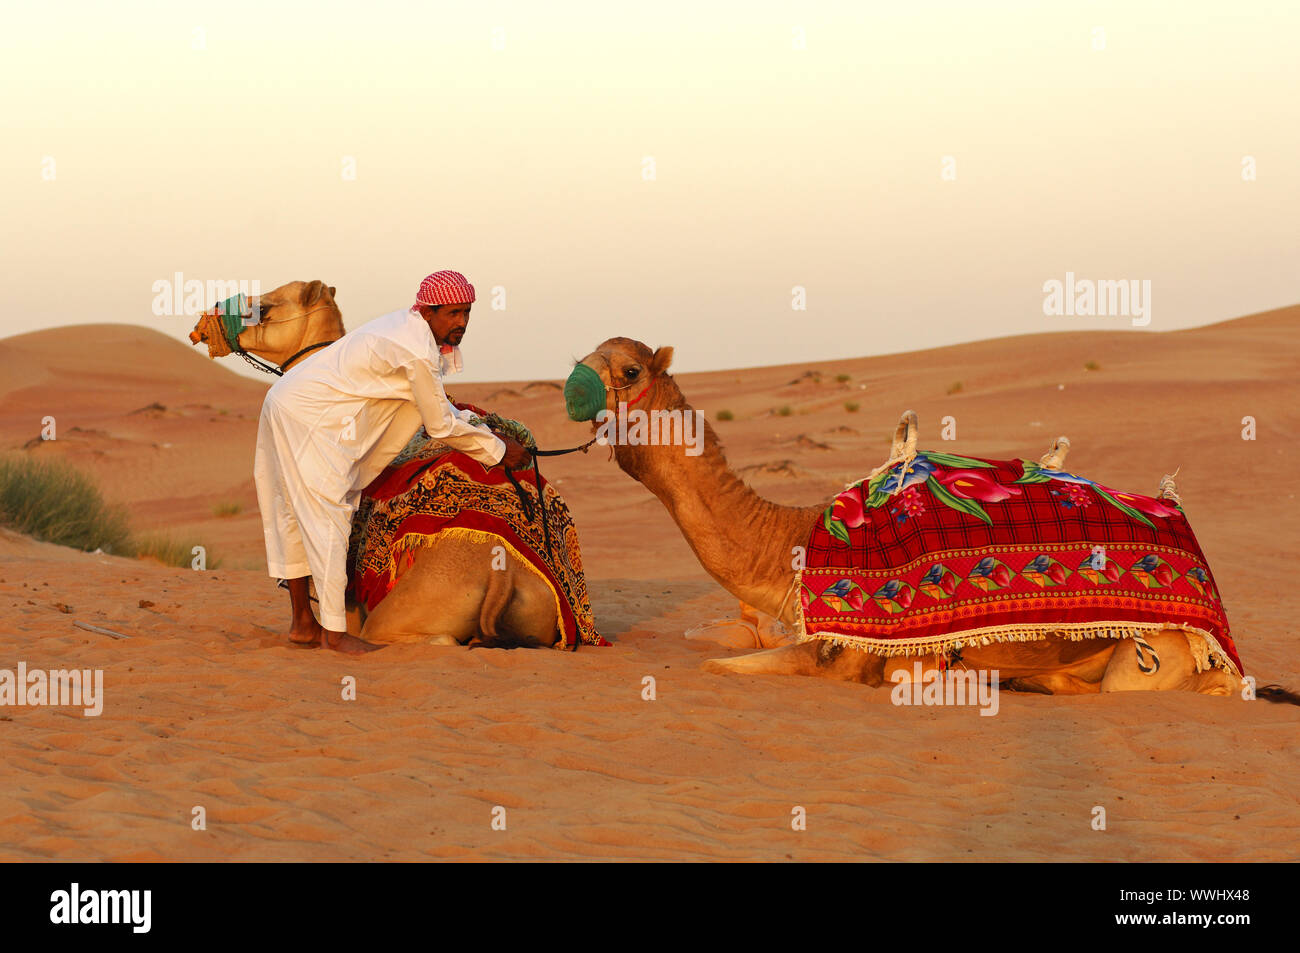 Camel guide with camels Stock Photo